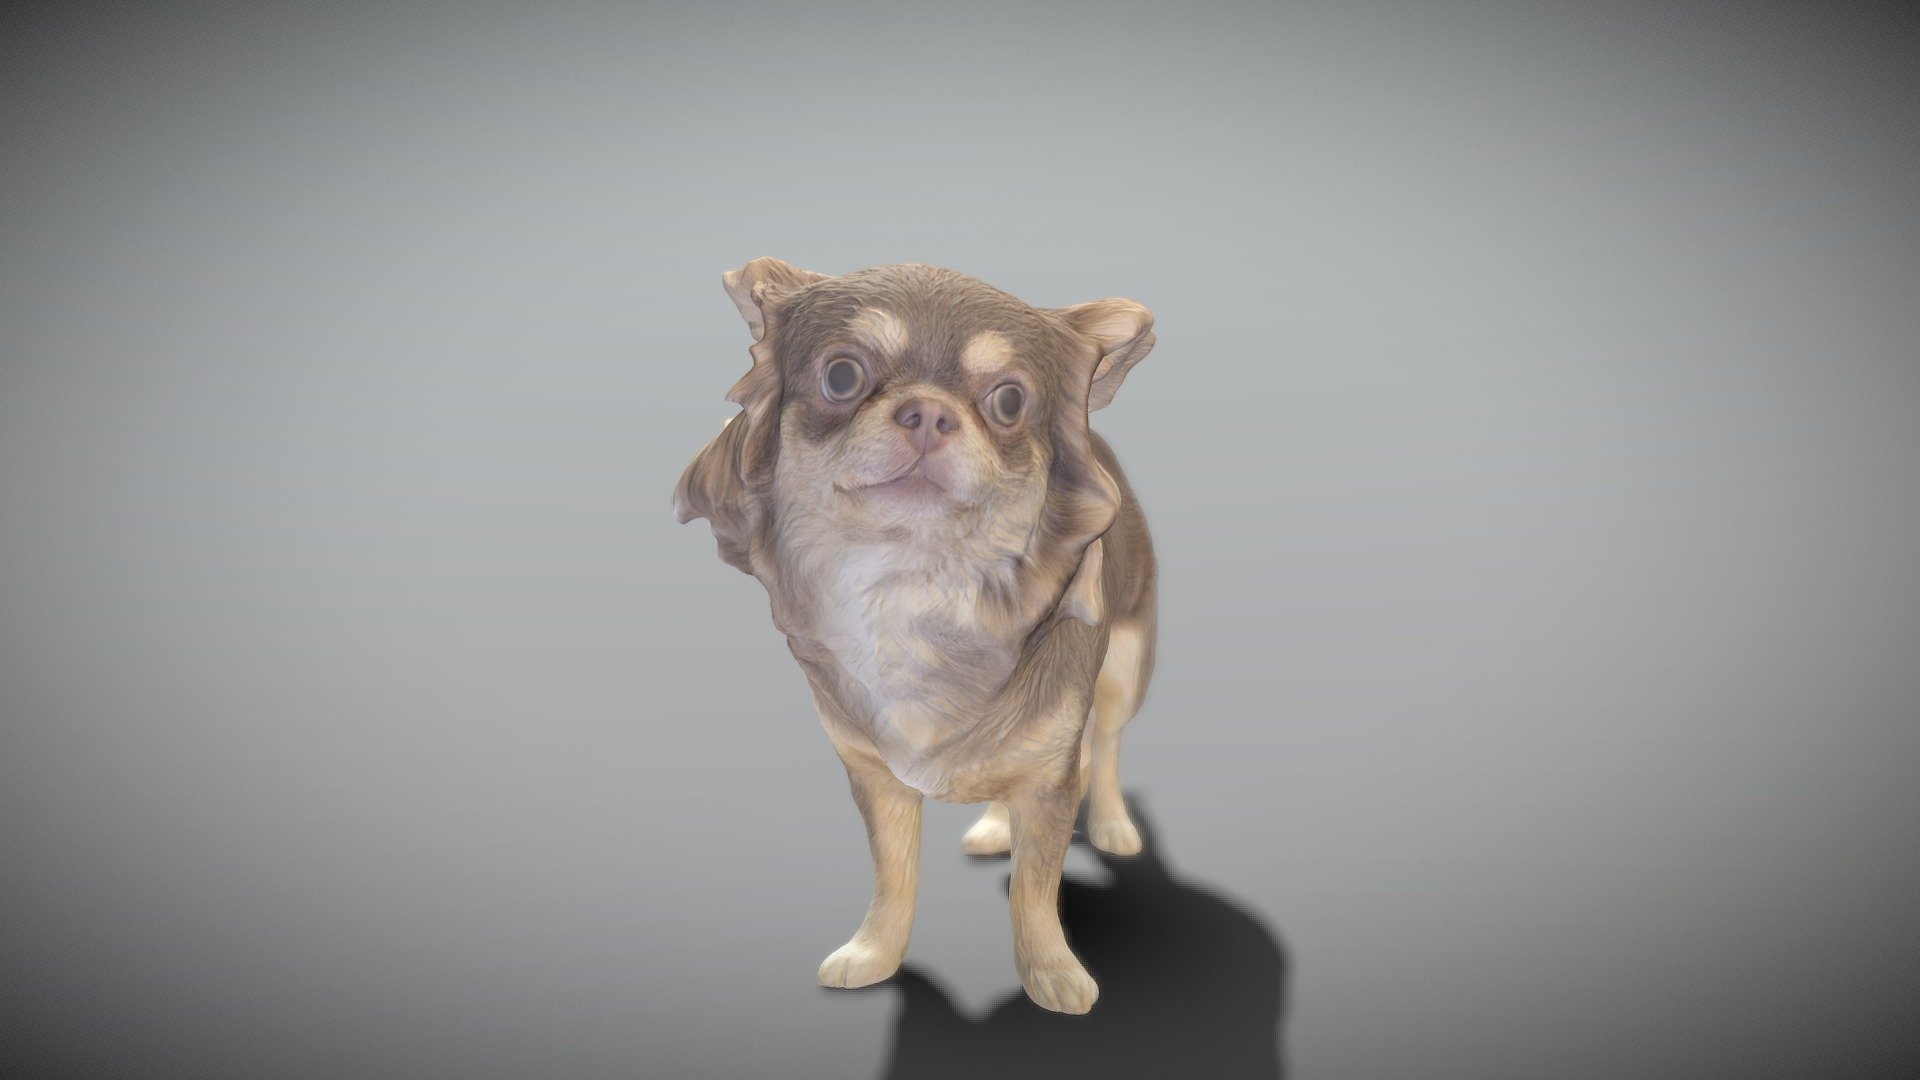 This is a true sized and highly detailed model of a young charming Сhihuahua dog. It will add life and coziness to any architectural visualisation of houses, playgrounds, parques, urban landscapes, etc.

The product is ready both for immediate use in architectural visualisations, or further render and detailed sculpting in Zbrush.

Technical specifications:




digital double 3d scan model

150k &amp; 30k triangles | double triangulated

high-poly model (.ztl tool with 4-5 subdivisions) clean and retopologized automatically via ZRemesher

sufficiently clean

PBR textures 8K resolution: Diffuse, Normal, Specular maps

non-overlapping UV map

no extra plugins are required for this model

Download package includes a Cinema 4D project file with Redshift shader, OBJ, FBX, STL files, which are applicable for 3ds Max, Maya, Unreal Engine, Unity, Blender, etc. All the textures you will find in the “Tex” folder, included into the main archive.

3D EVERYTHING

Stand with Ukraine! - Сhihuahua dog 24 - Buy Royalty Free 3D model by deep3dstudio 3d model